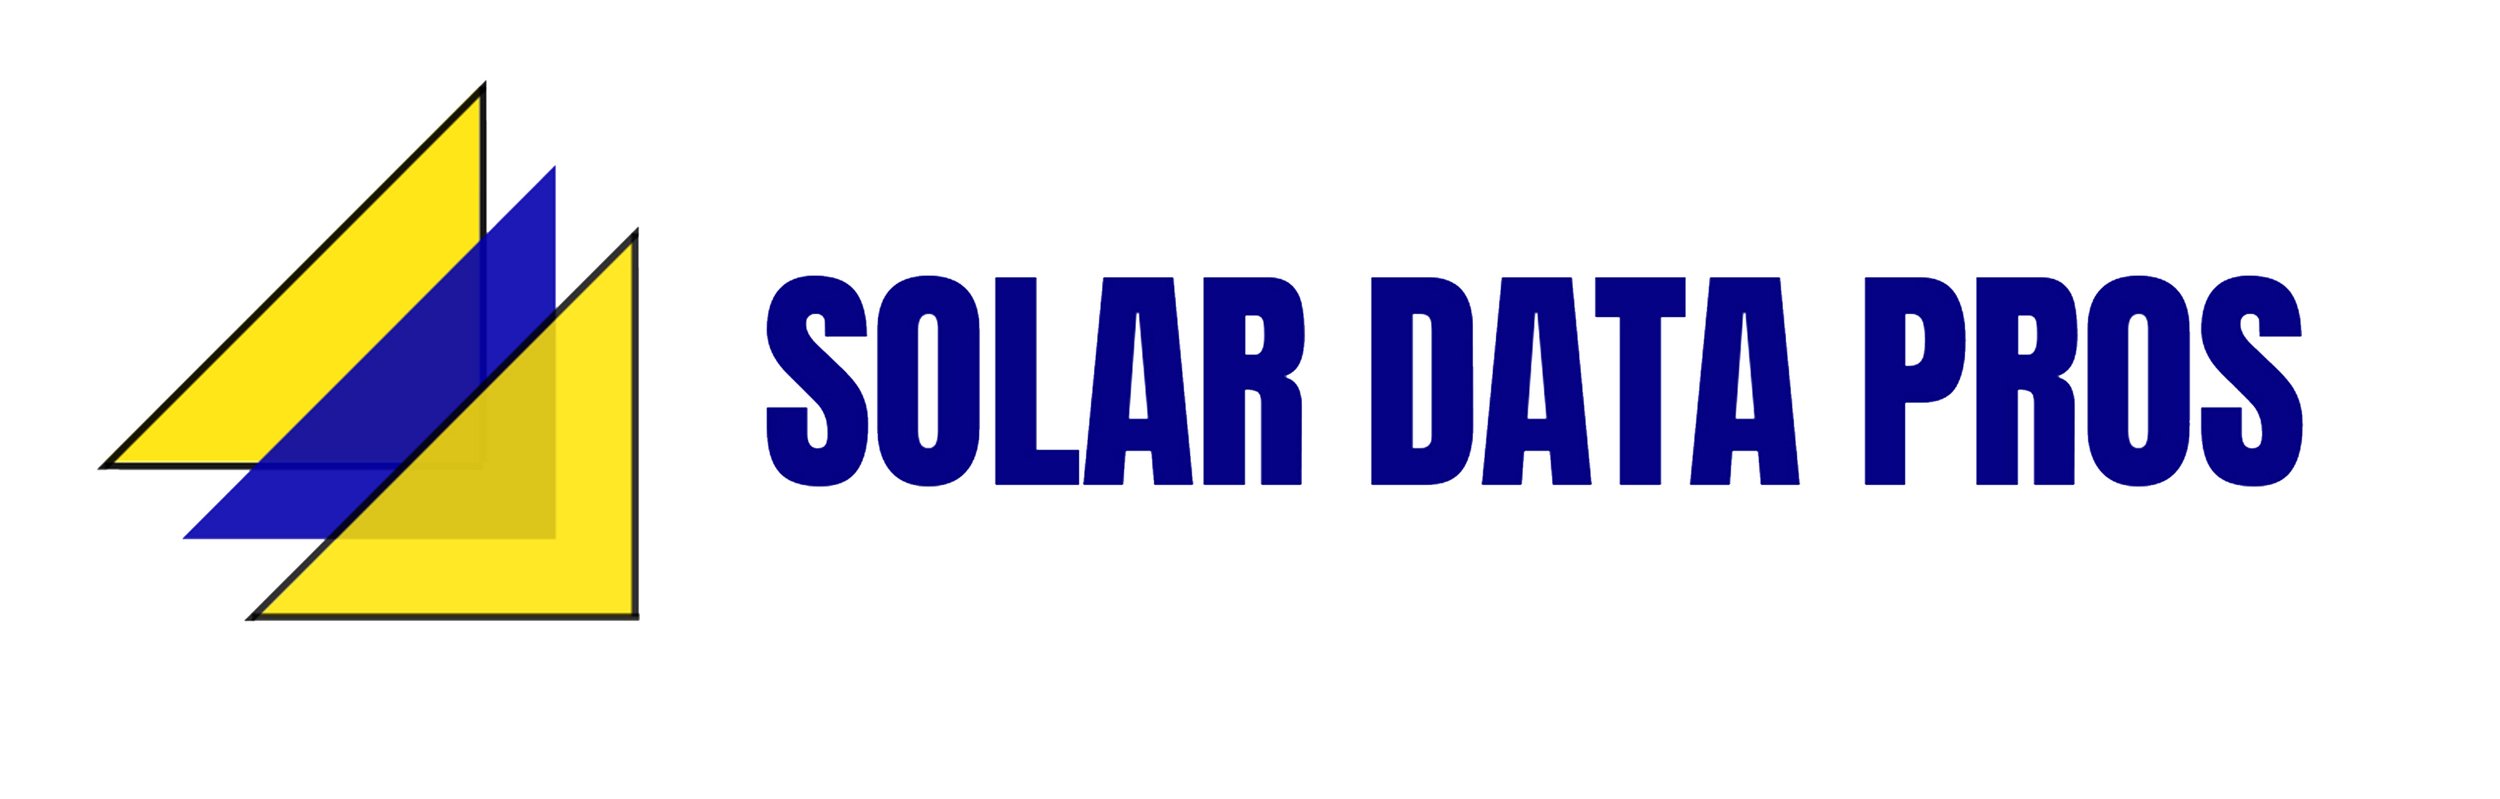 solar data pros-know-true-up-web.png